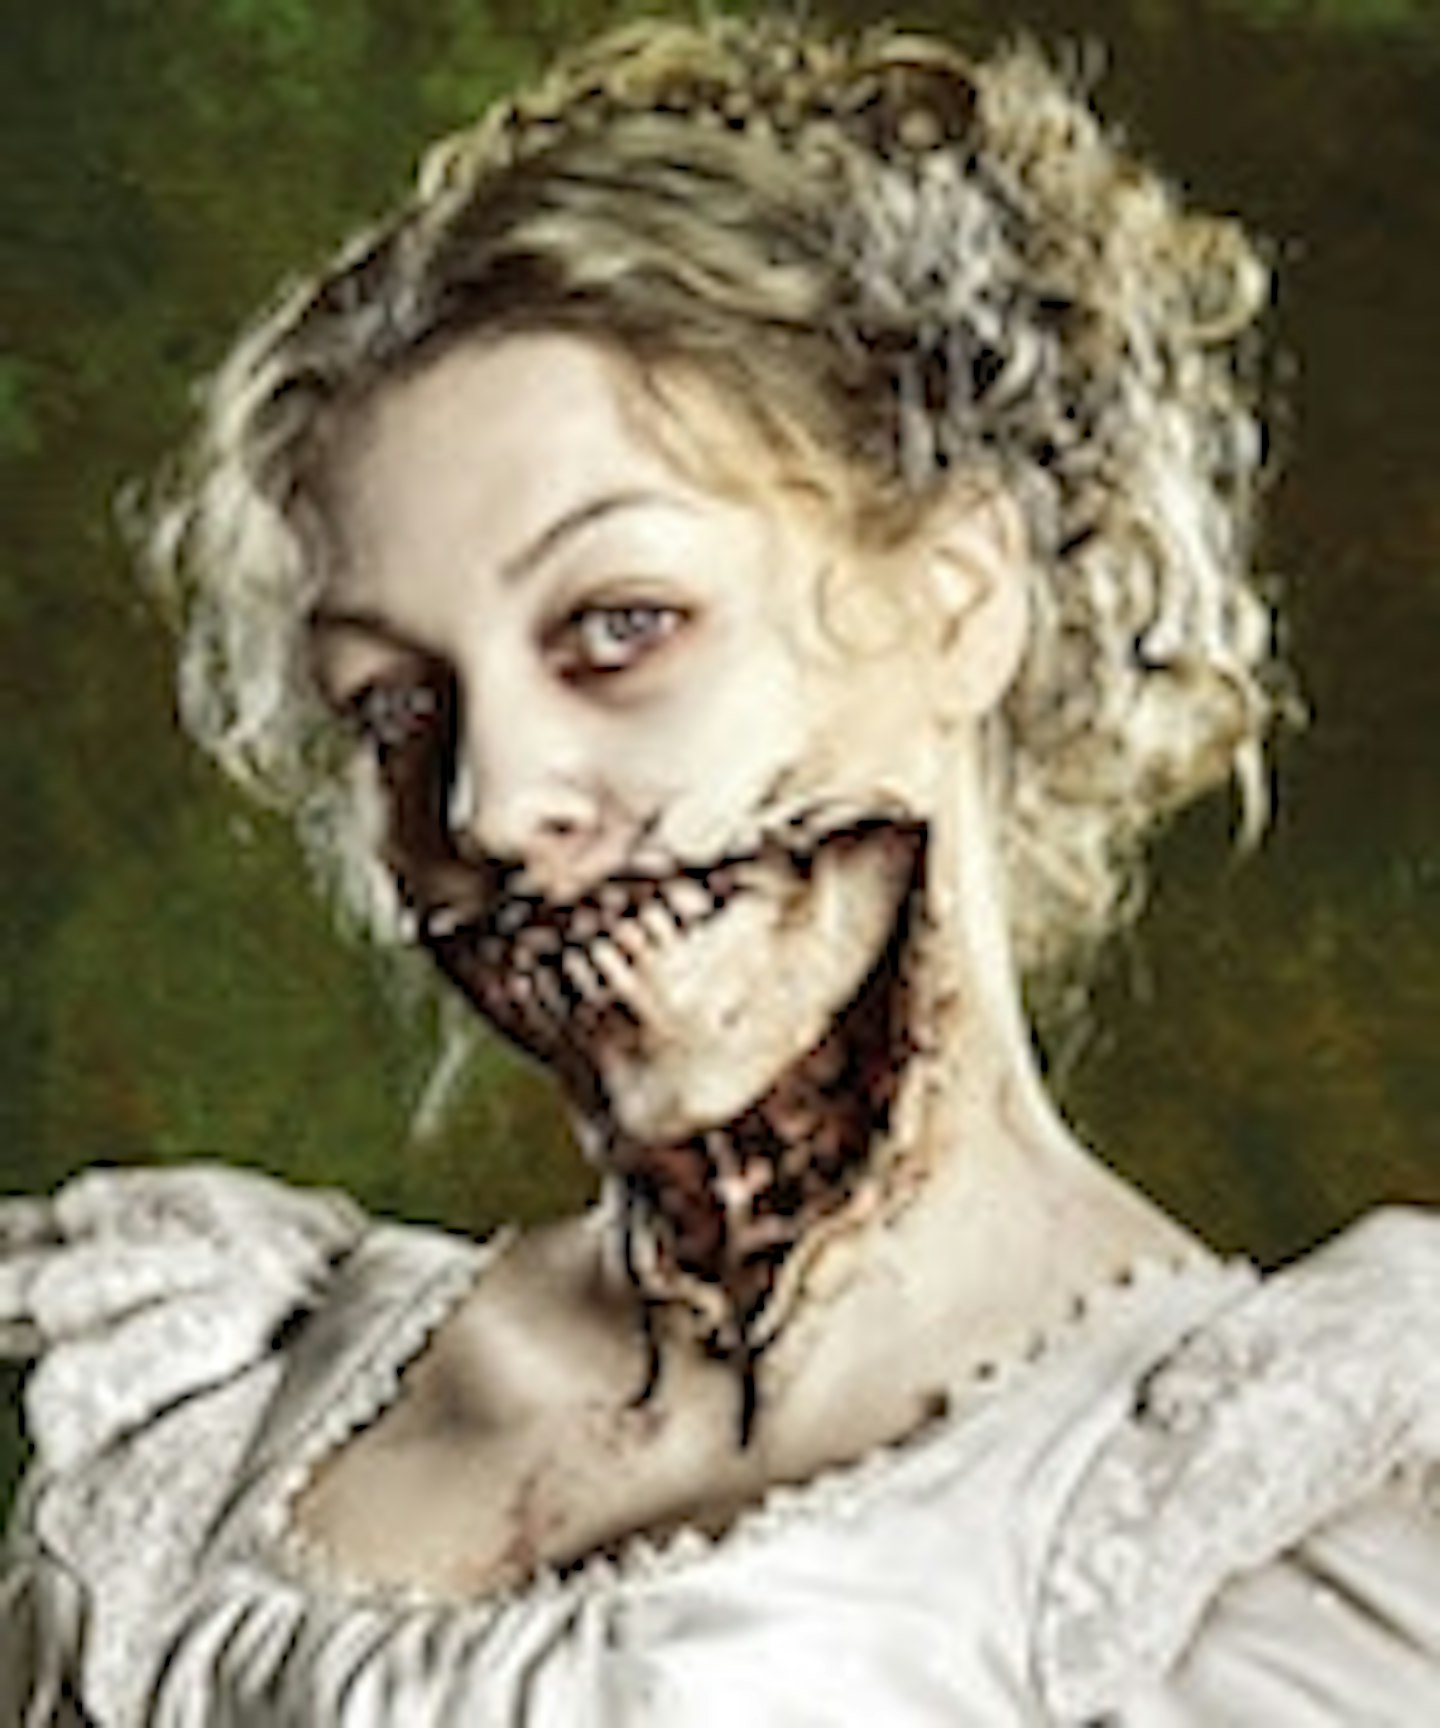 UK Teaser Trailer And Poster For Pride And Prejudice And Zombies